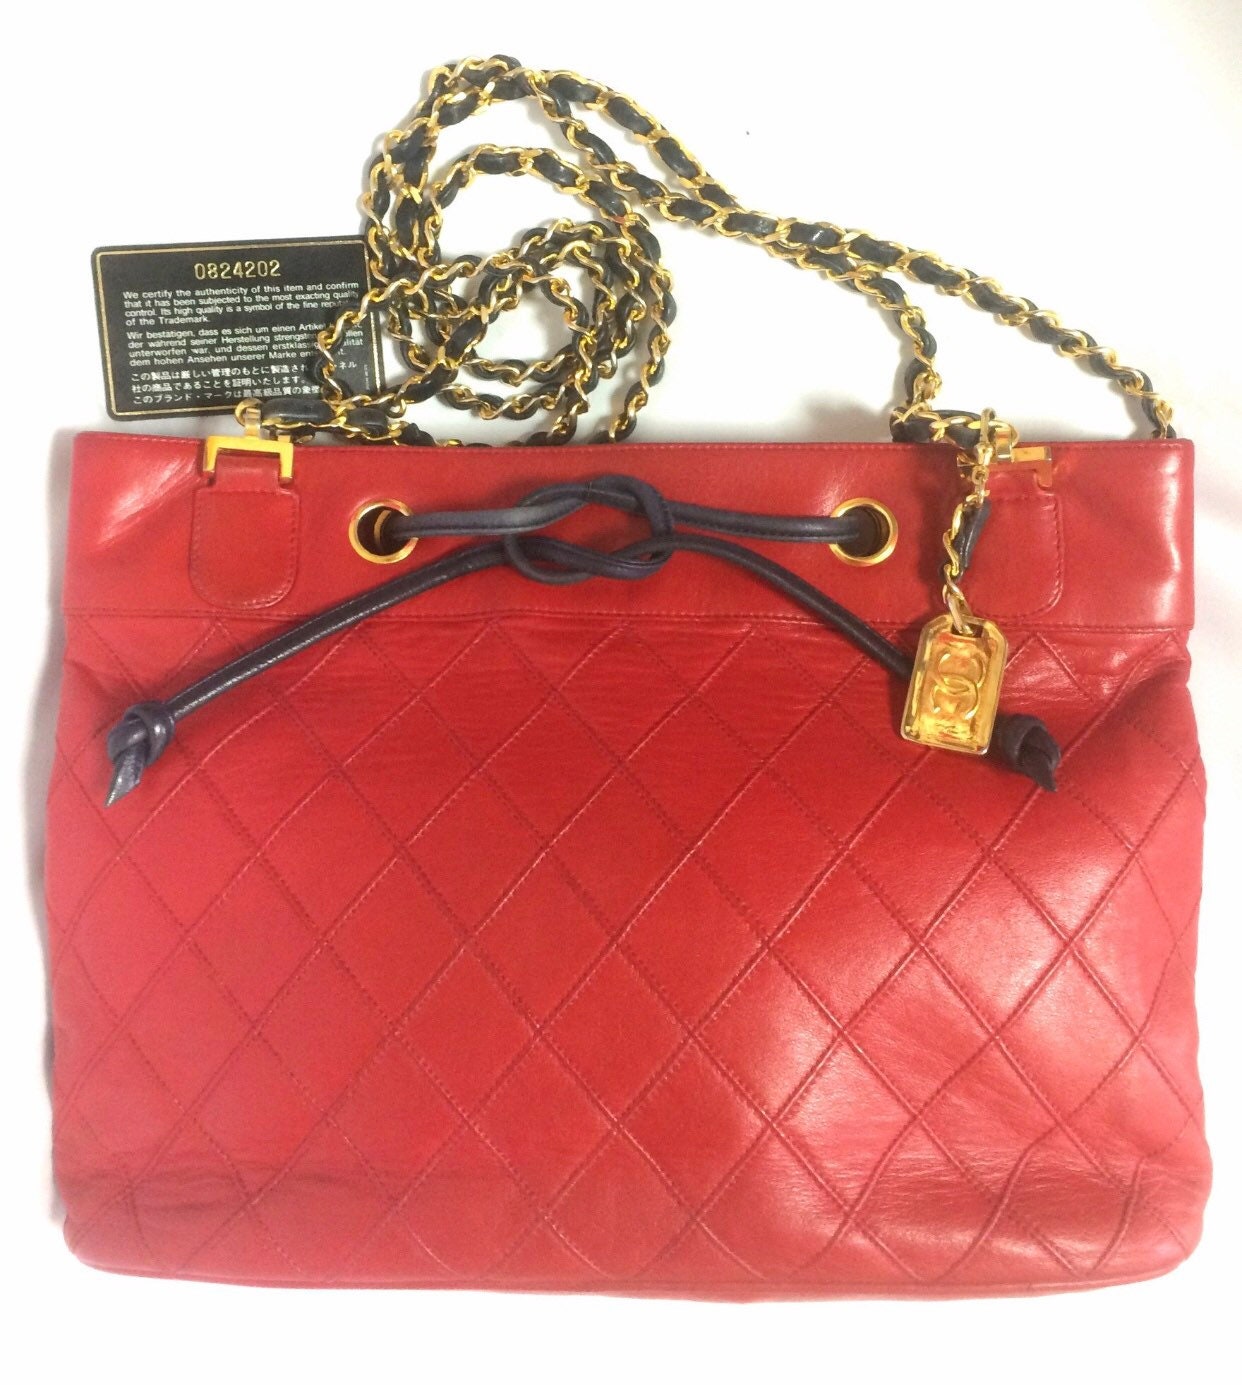 Vintage CHANEL Classic Tote Bag in Red Leather With Gold Tone